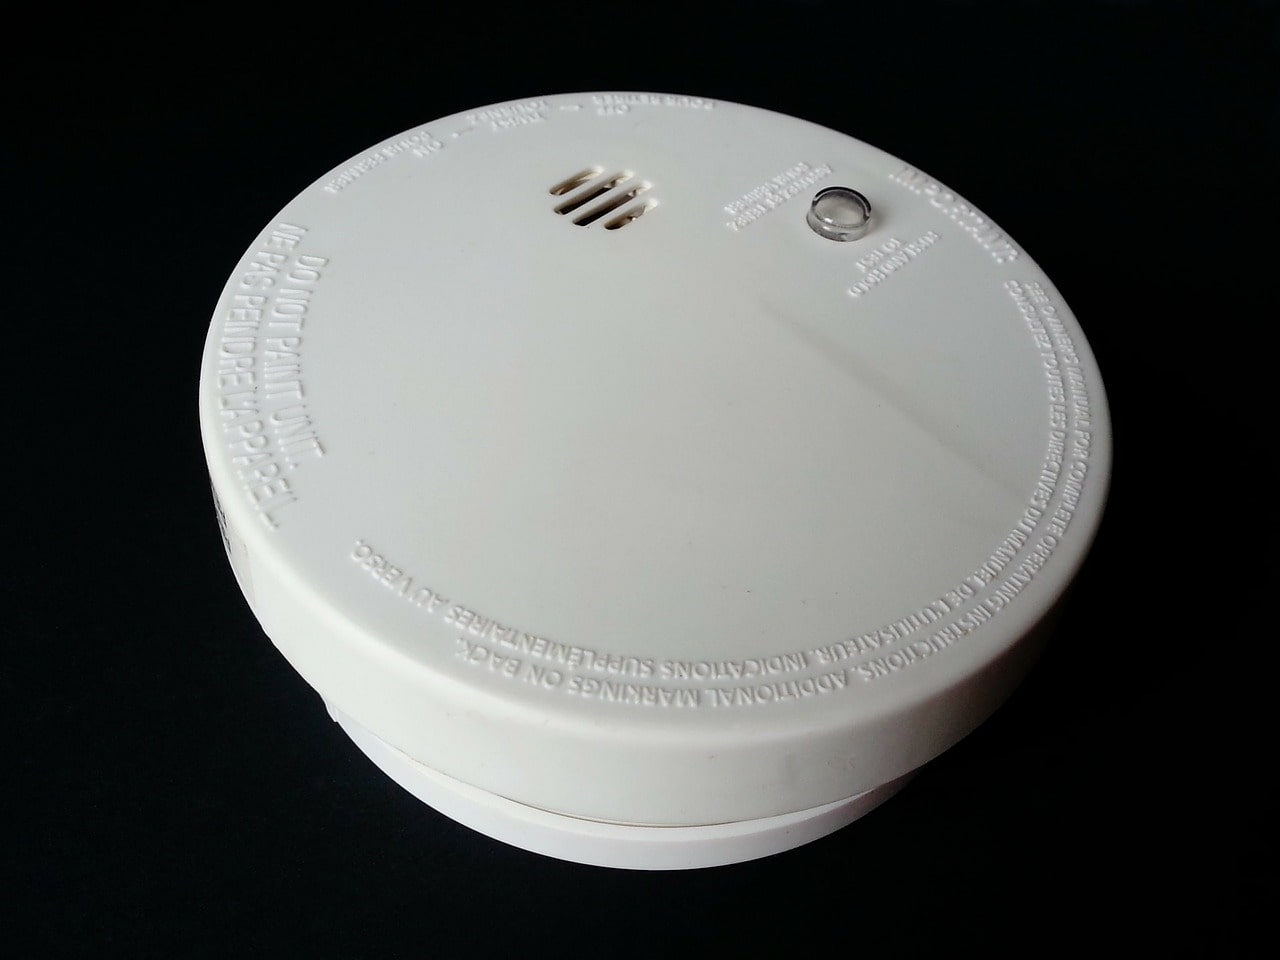 How To Use The Hush Button On A Smoke Detector